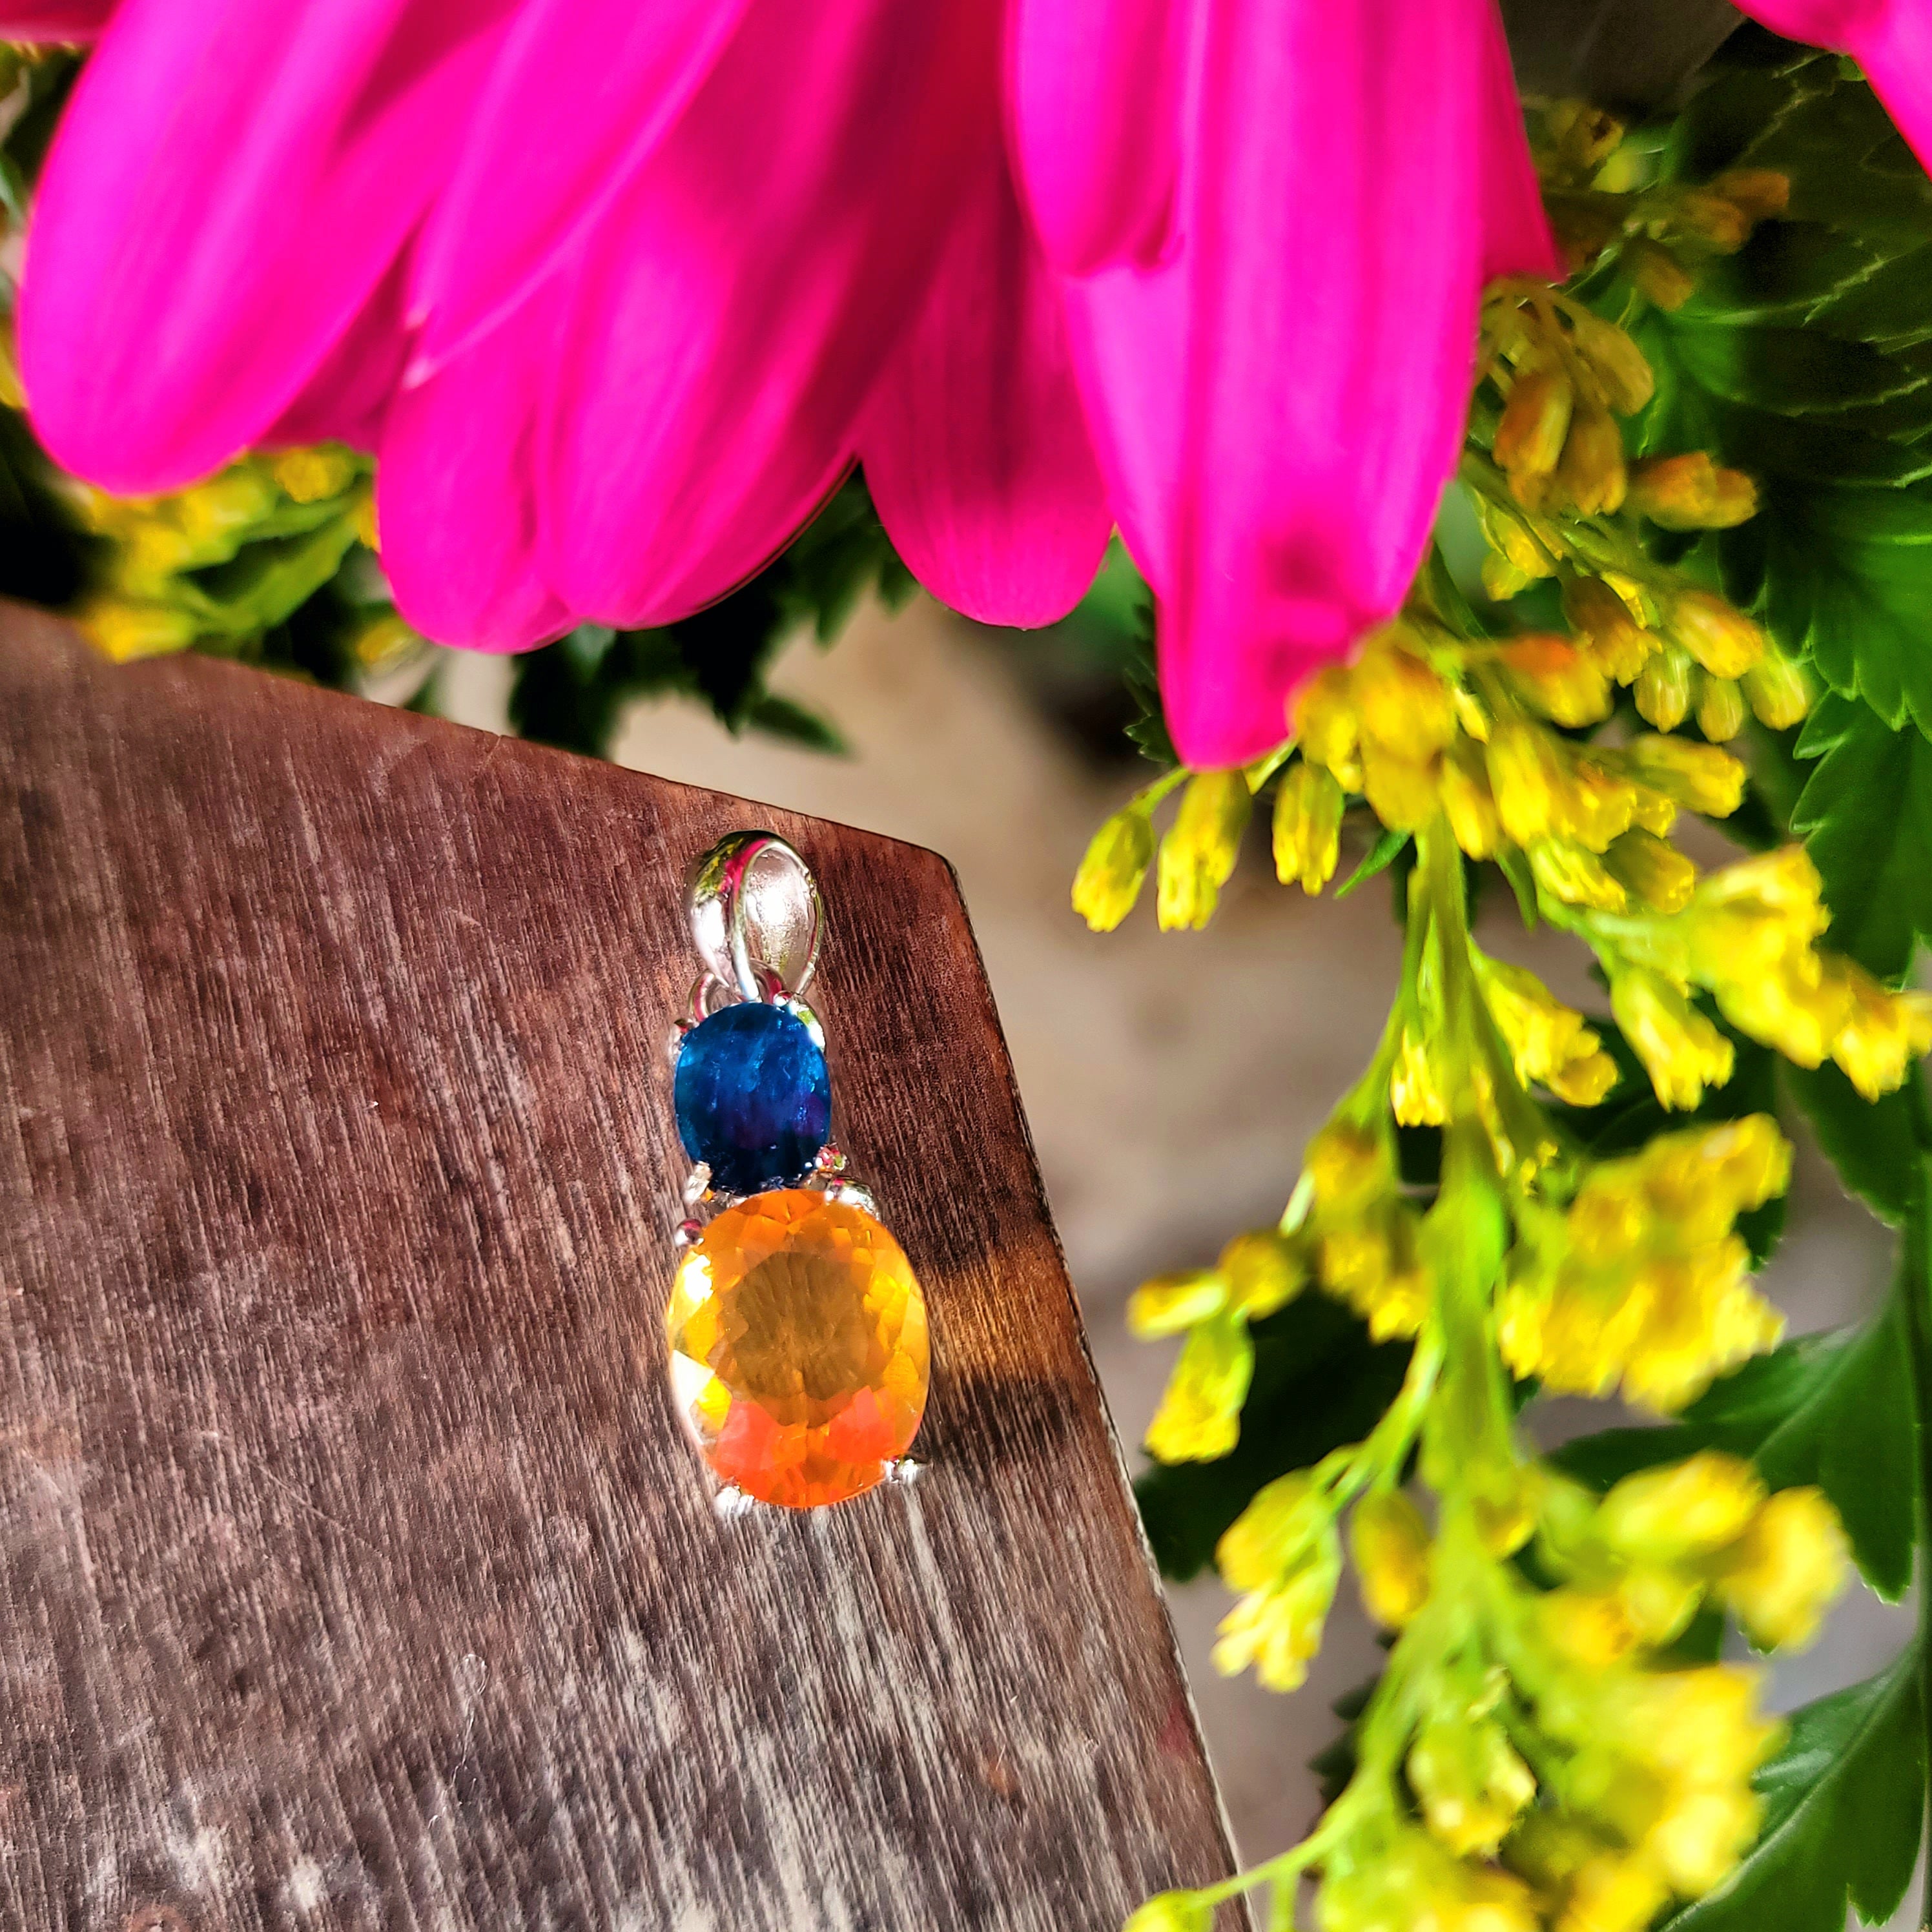 Neon Blue Apatite x Fire Opal Pendant .925 Silver for Intuitively Unlocking Intimacy, Passion & Pleasure